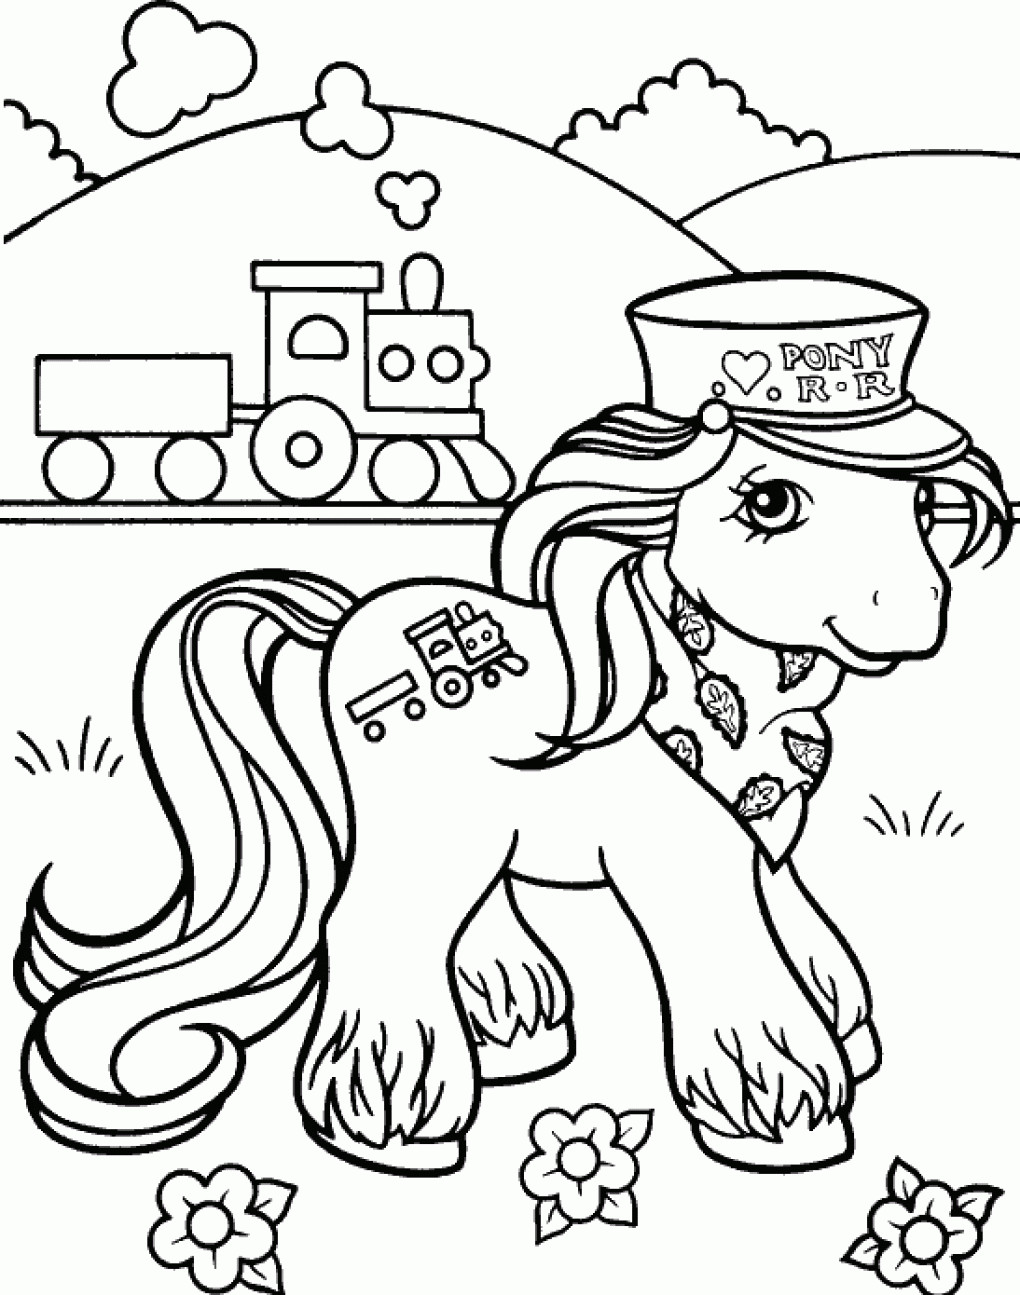 Coloring Sheets For Little Kids
 FUN & LEARN Free worksheets for kid My little pony free